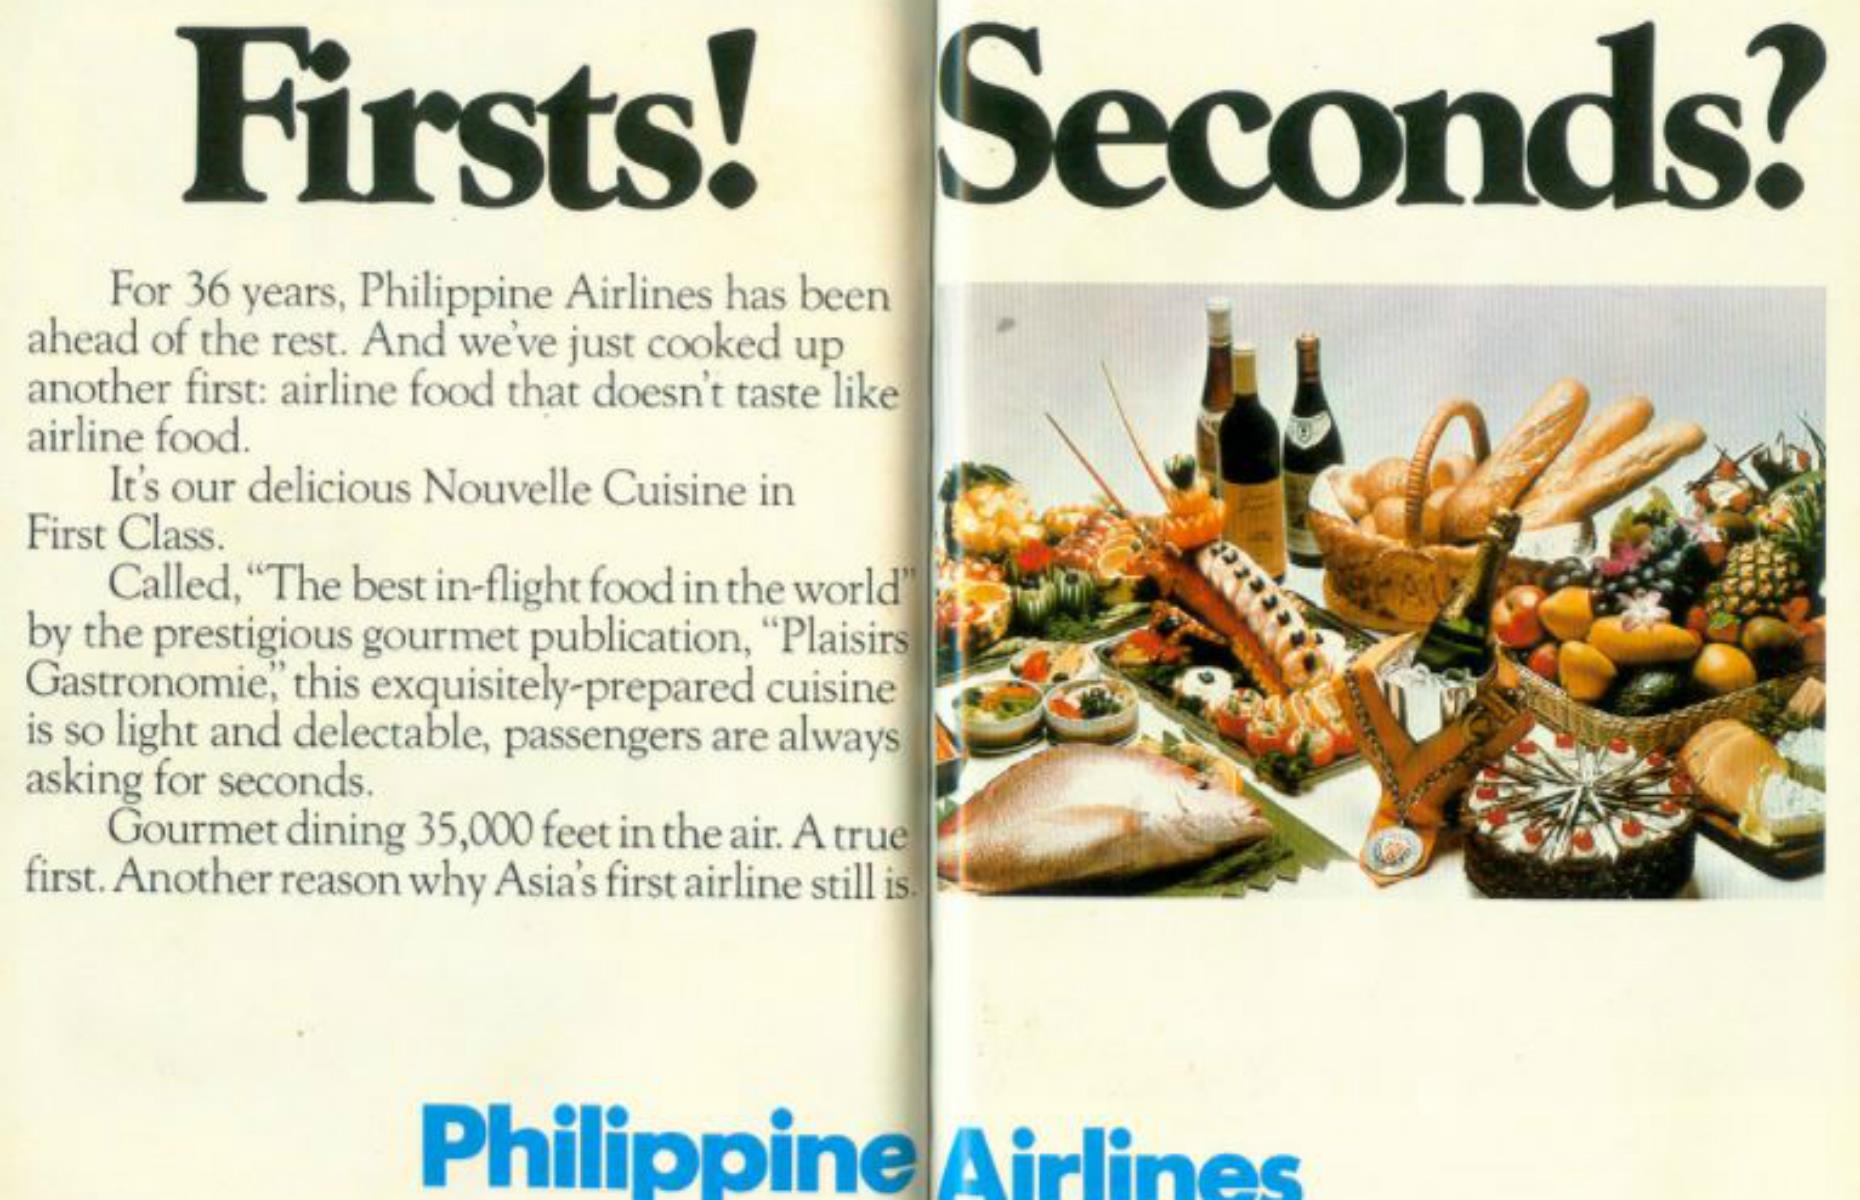 <p>As the first airline in Asia to offer food on board, Philippine Airlines had always been ahead of the curve. By 1984 they had kicked things up another gear by serving nouvelle cuisine at 30,000ft. First-class hors d'oeuvres included pumpernickel with smoked trout mousse and sea perch salad in vine leaves, while desserts featured intricate creations such as a millefeuille Strasbourgeoise.</p>